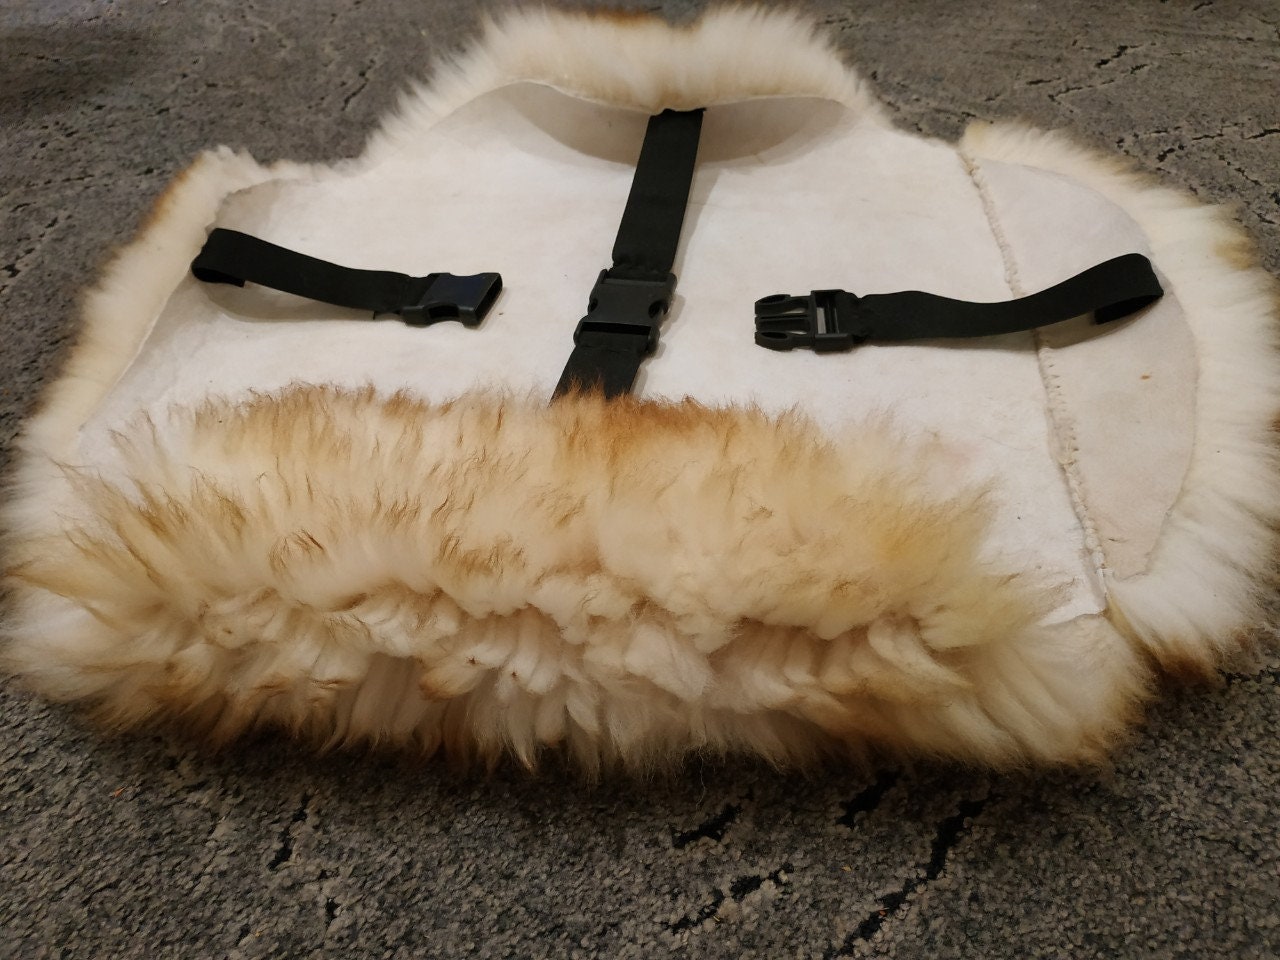 High Quality Black Sheepskin Motorcycle Seat Cover for Sale Online –  Leather-Moccasins